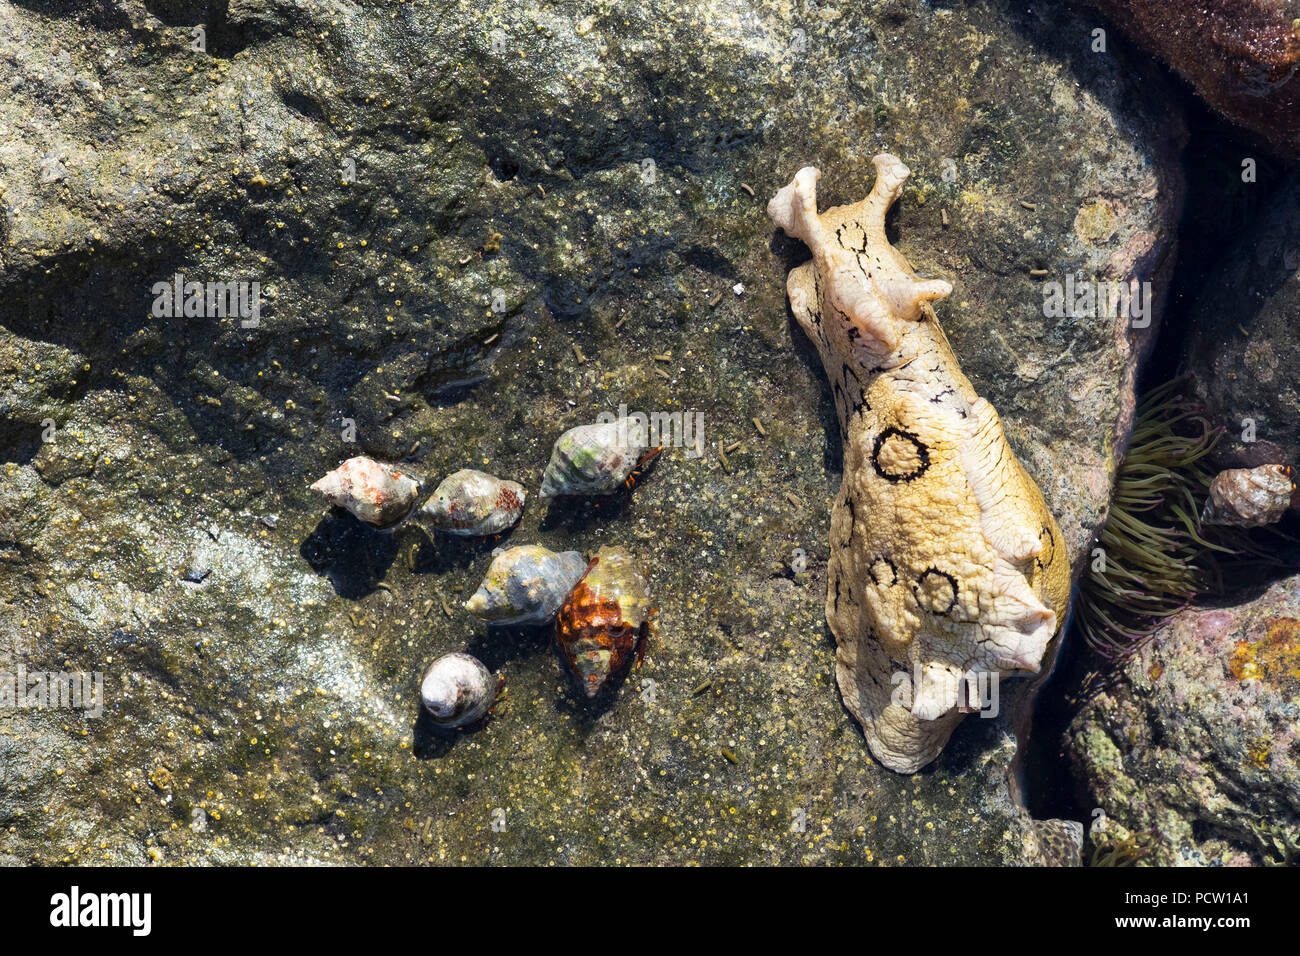 Spotted Sea Hare (Aplysia dactylomela) and Hermit Crabs, La Gomera, Canary Islands, Canaries, Spain Stock Photo